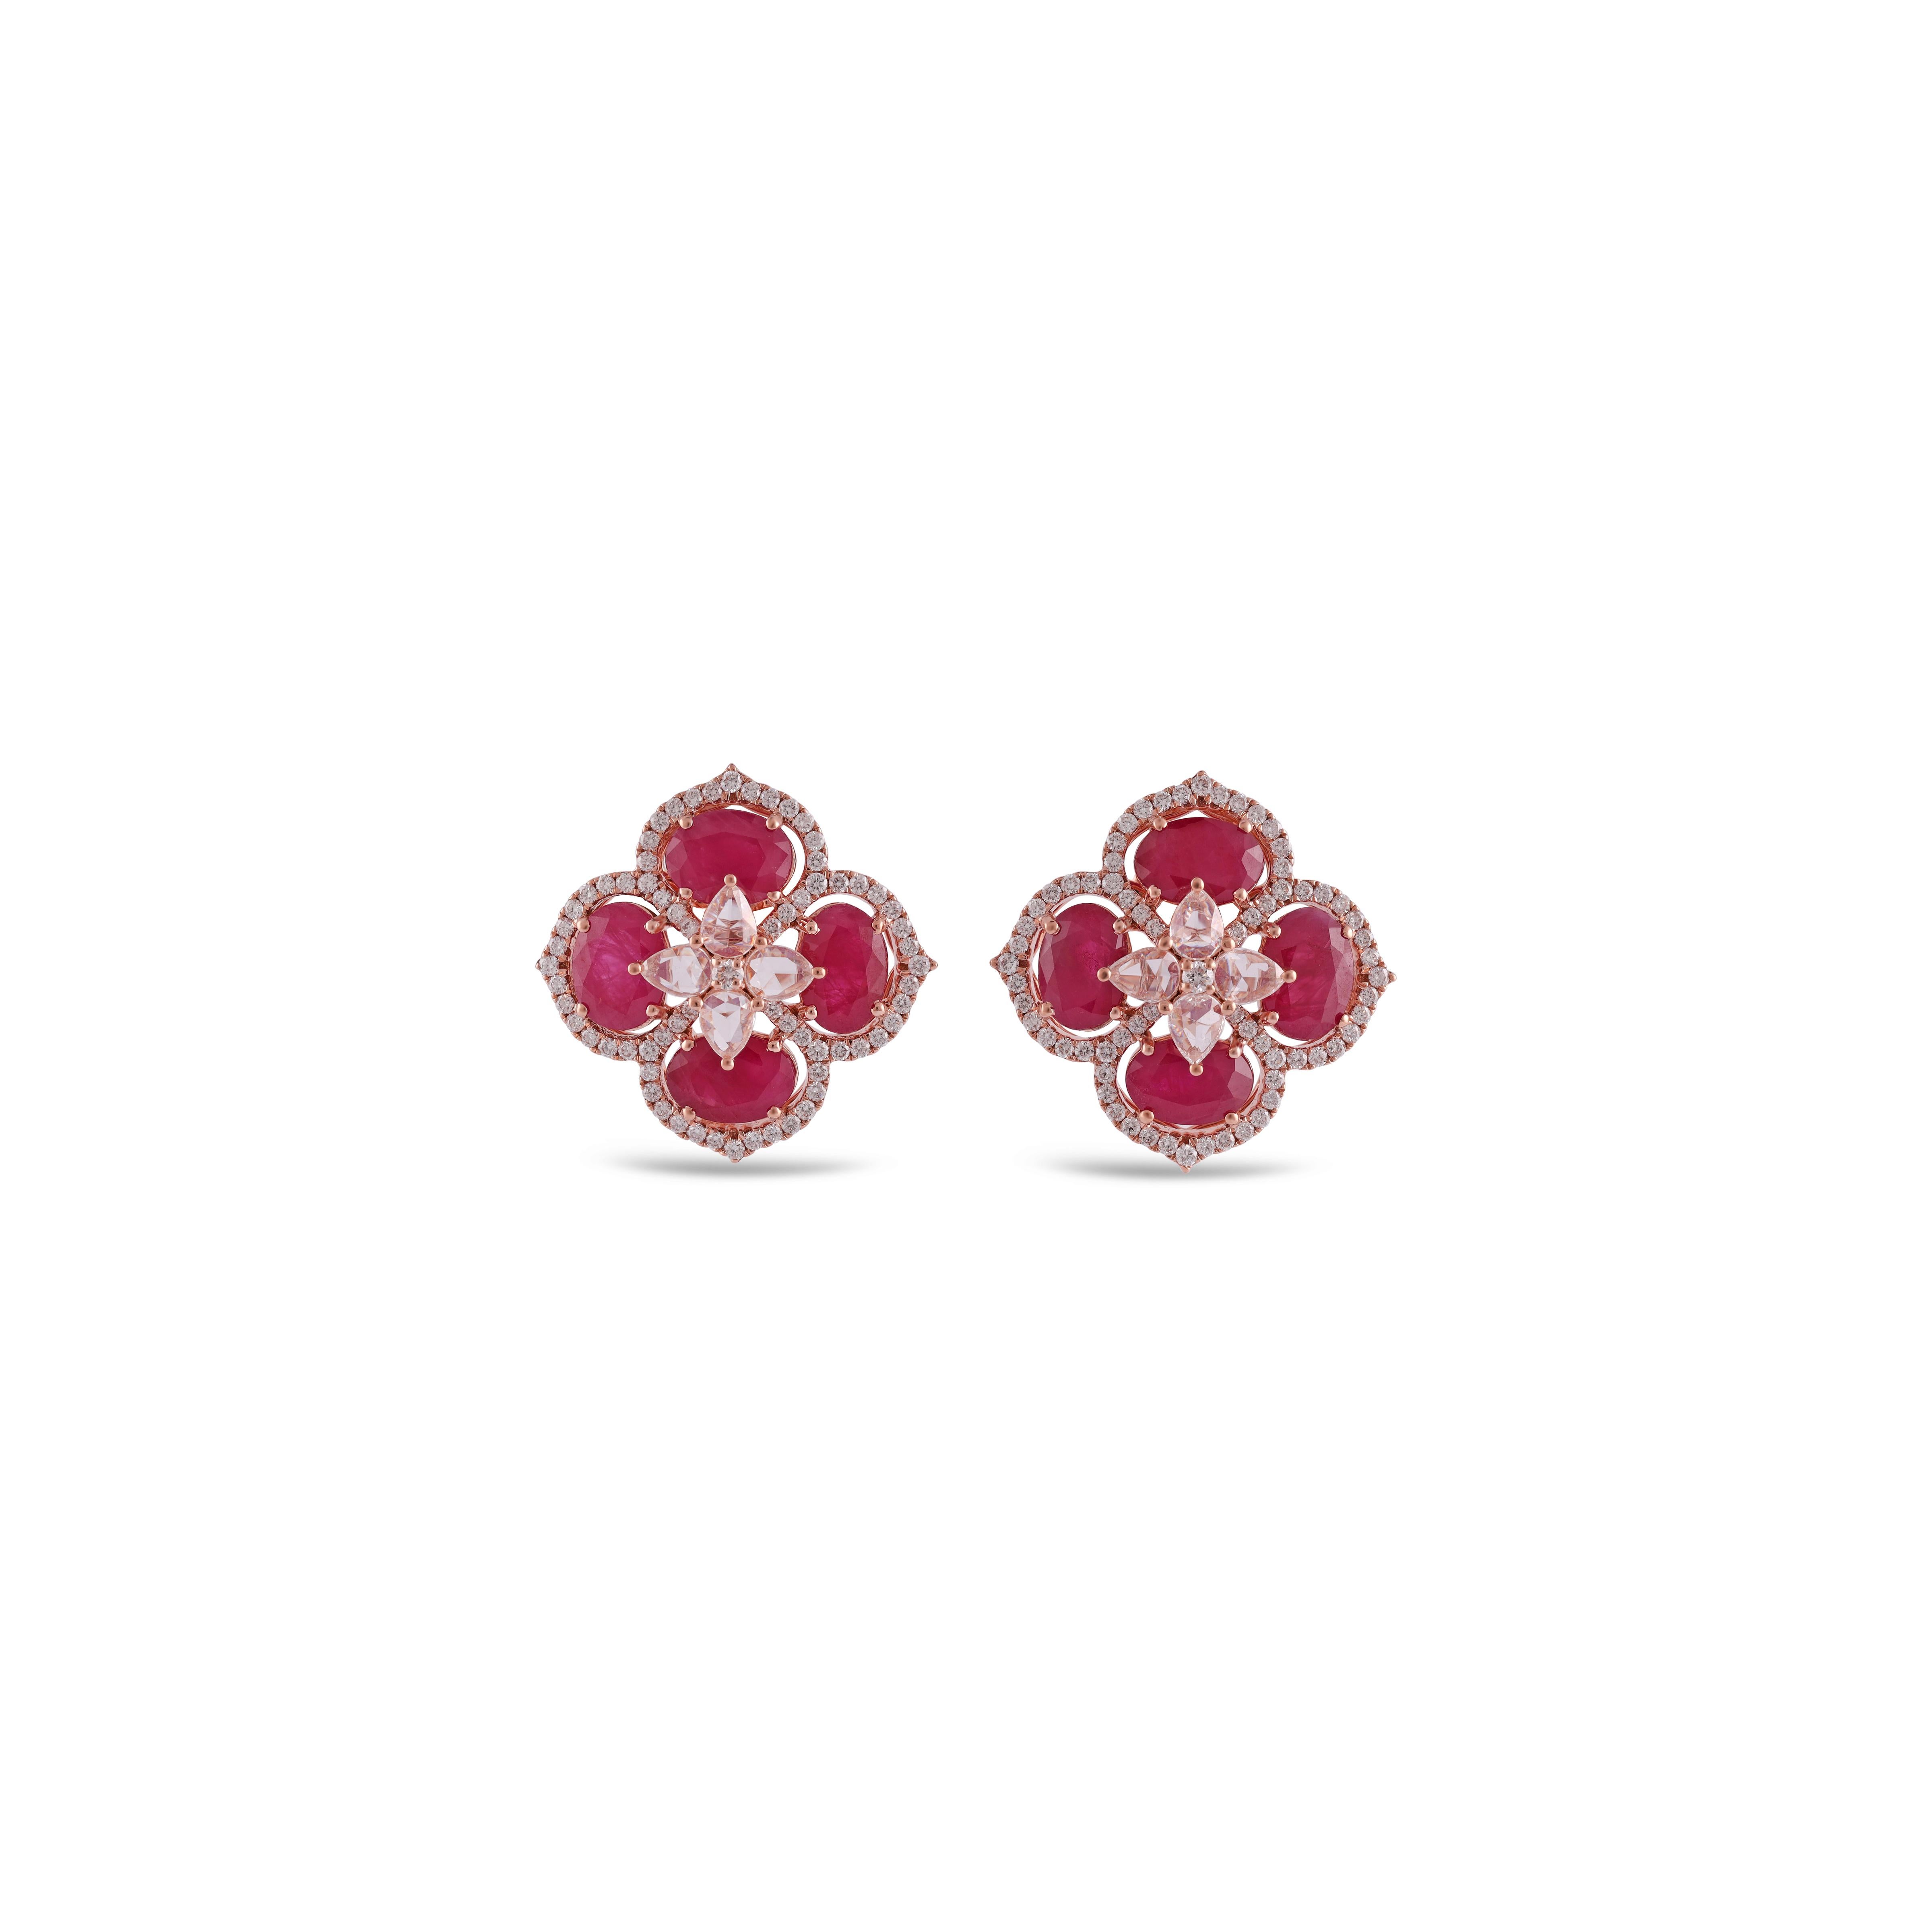 Ruby Rose Gold Diamond Earrings
Earring.

Ruby 7.44 Cts
Diamond 1.31 Cts


Custom Services
Resizing is available.
Request Customization
